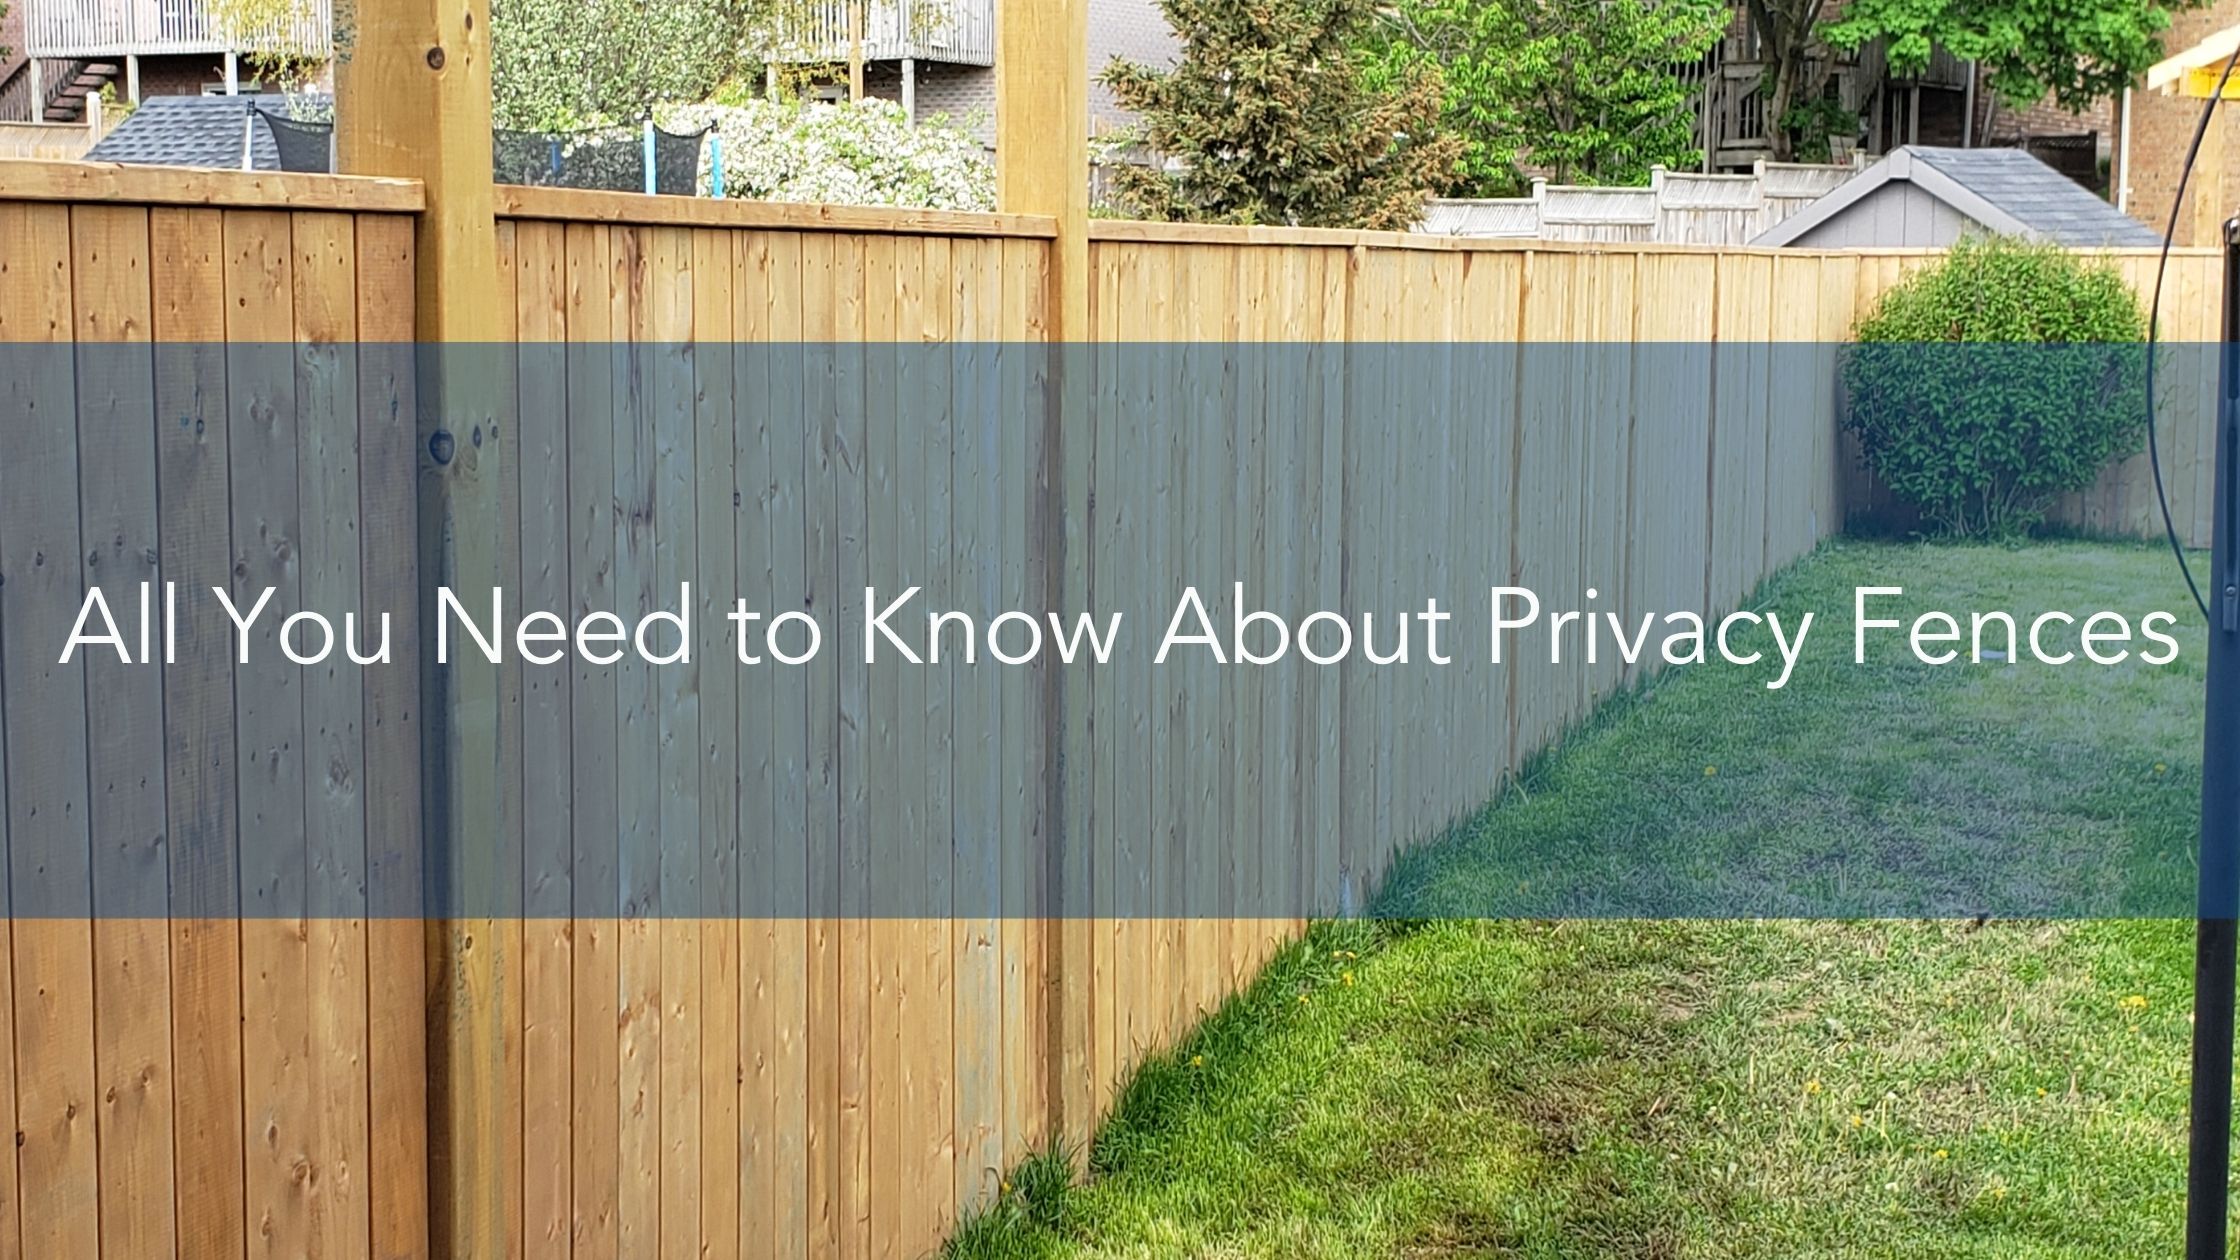 All You Need to Know About Privacy Fences